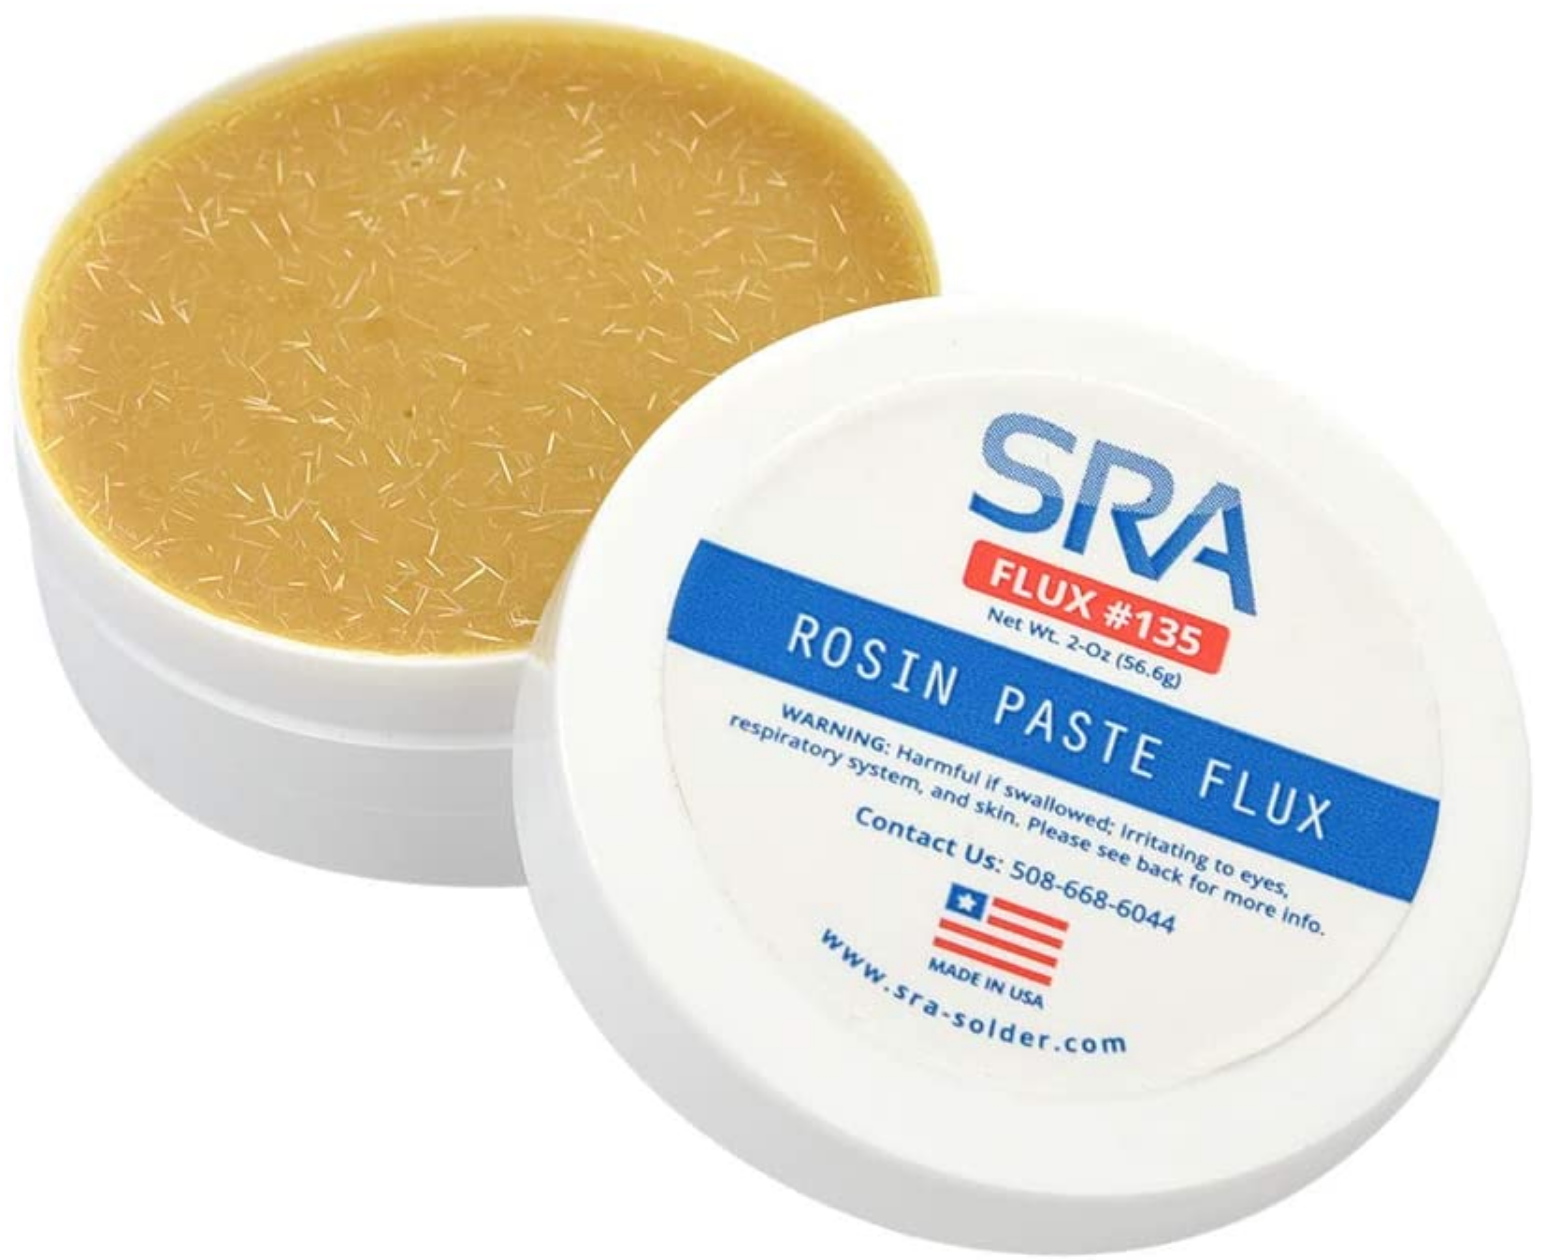 SRA Soldering Products Rosin Paste Flux #135 In A 2 oz Jar Review